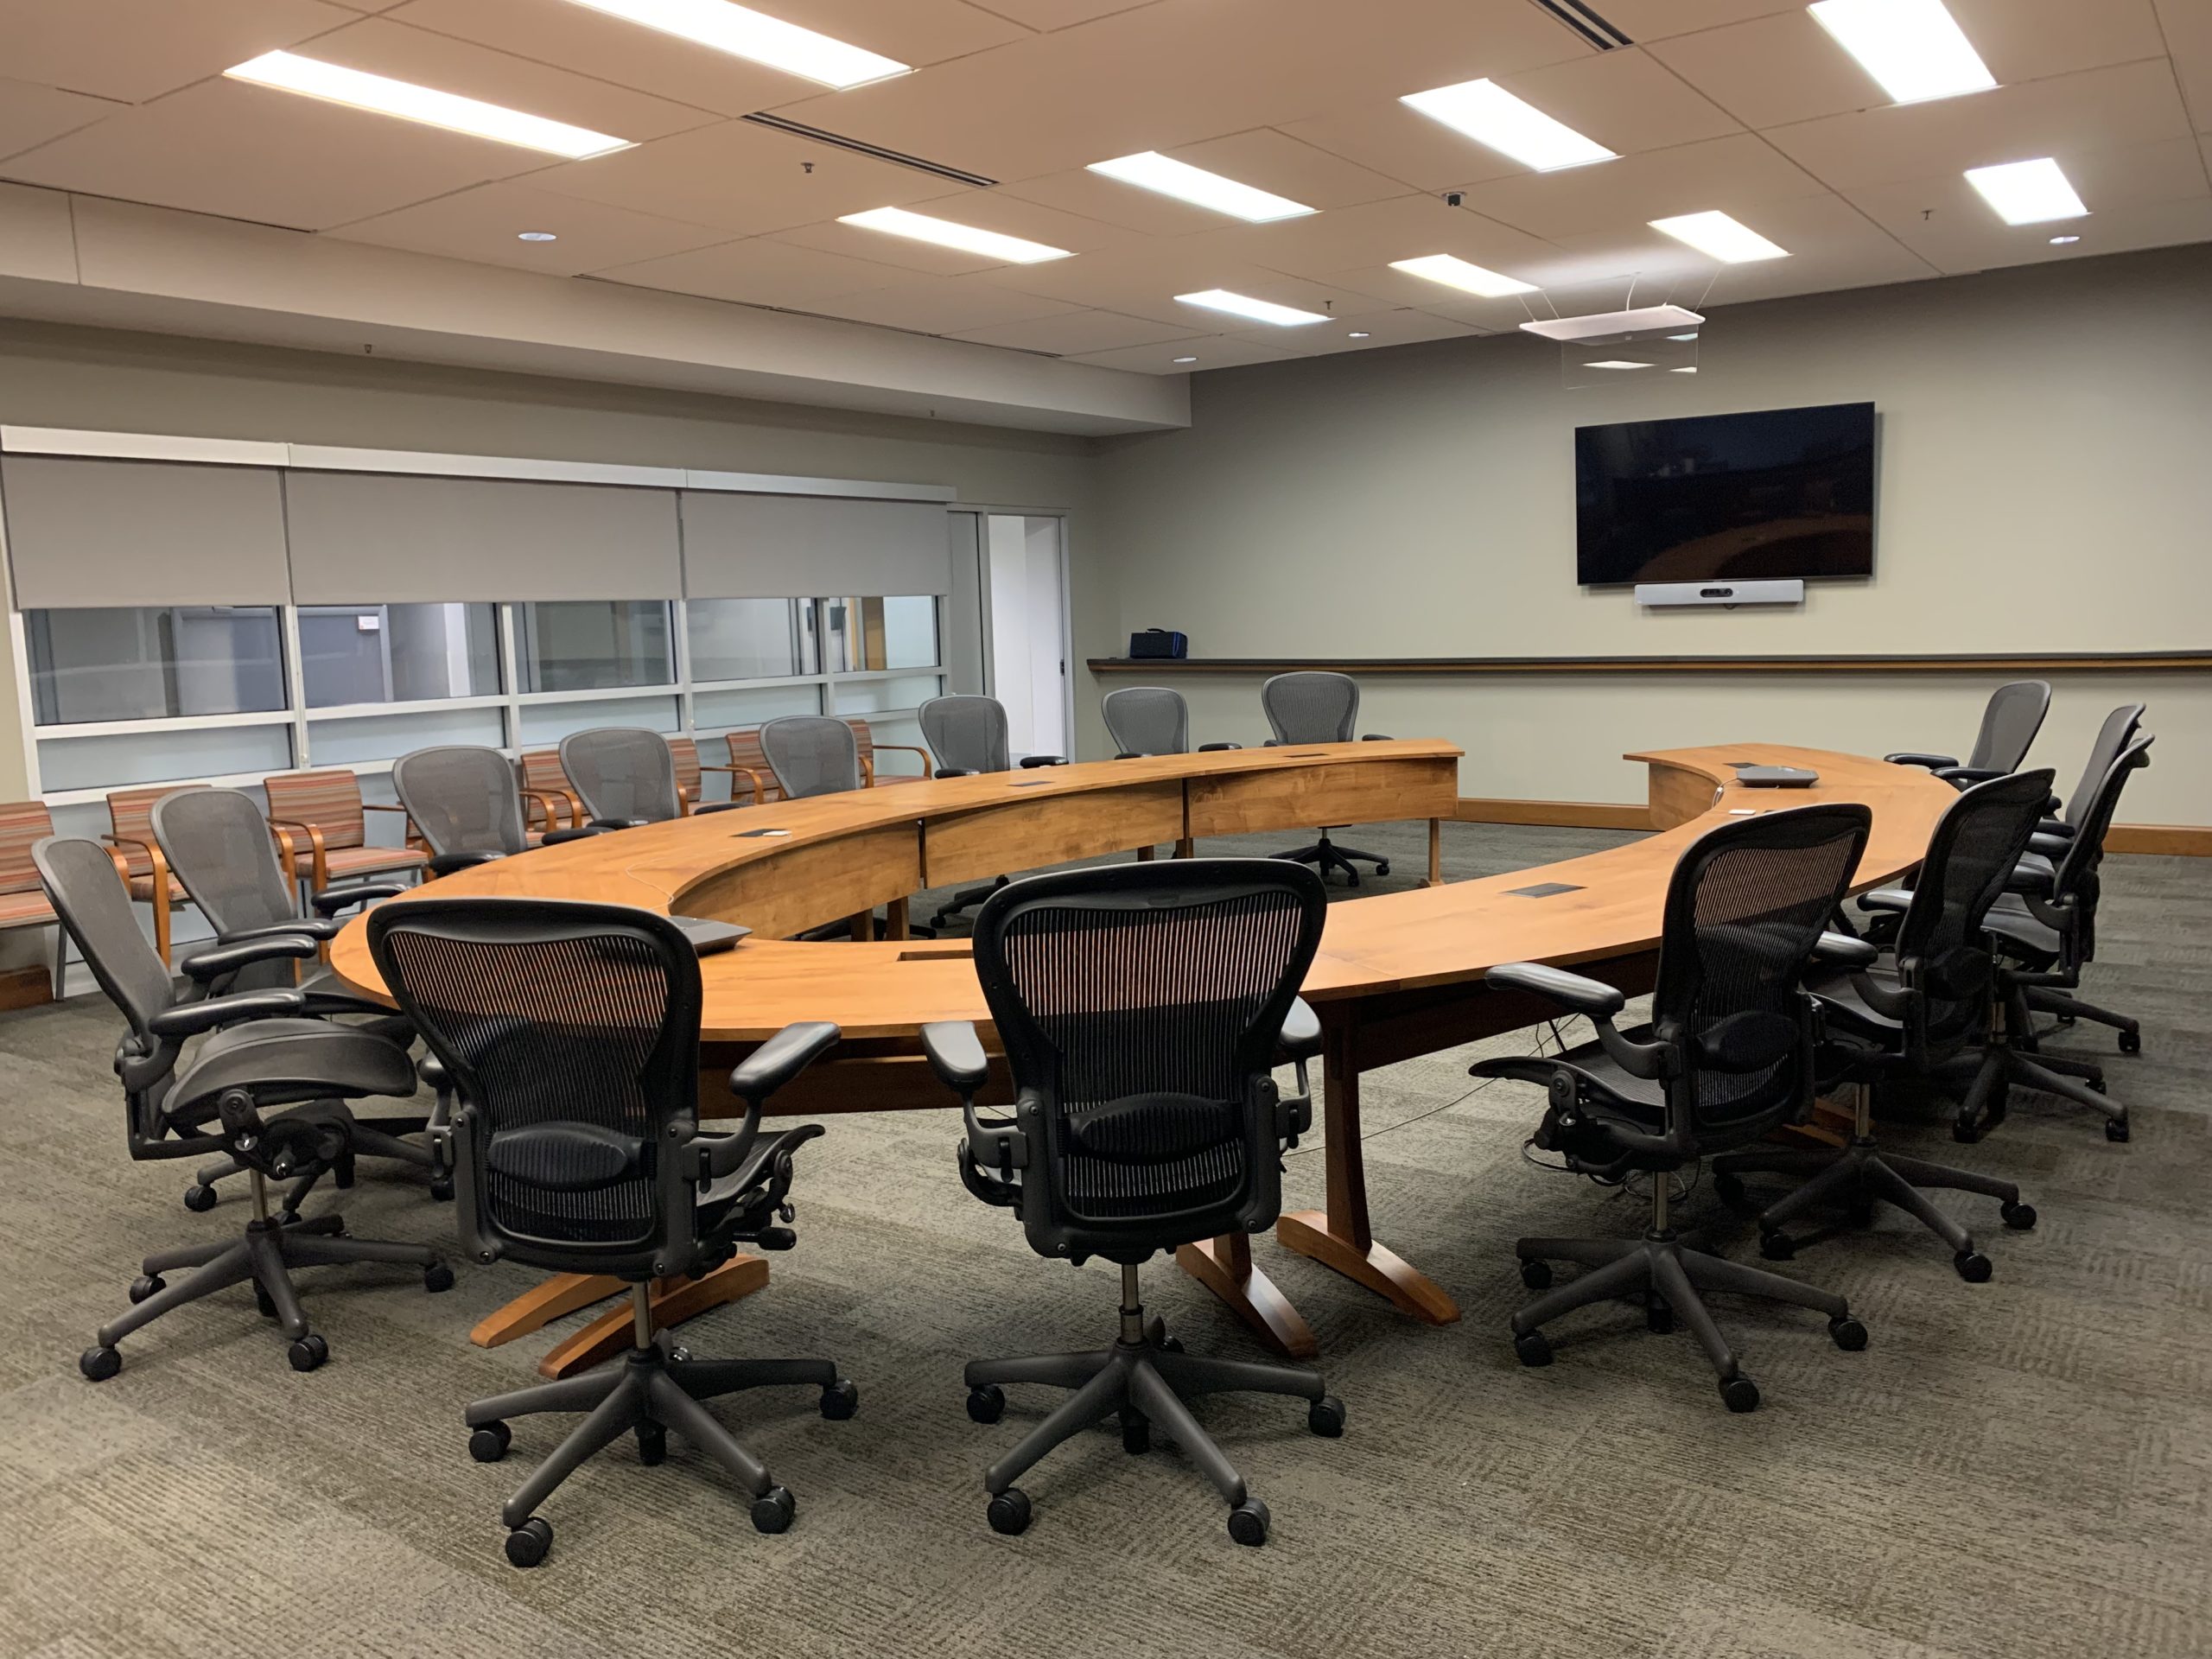 Boardroom better suited to video conferencing